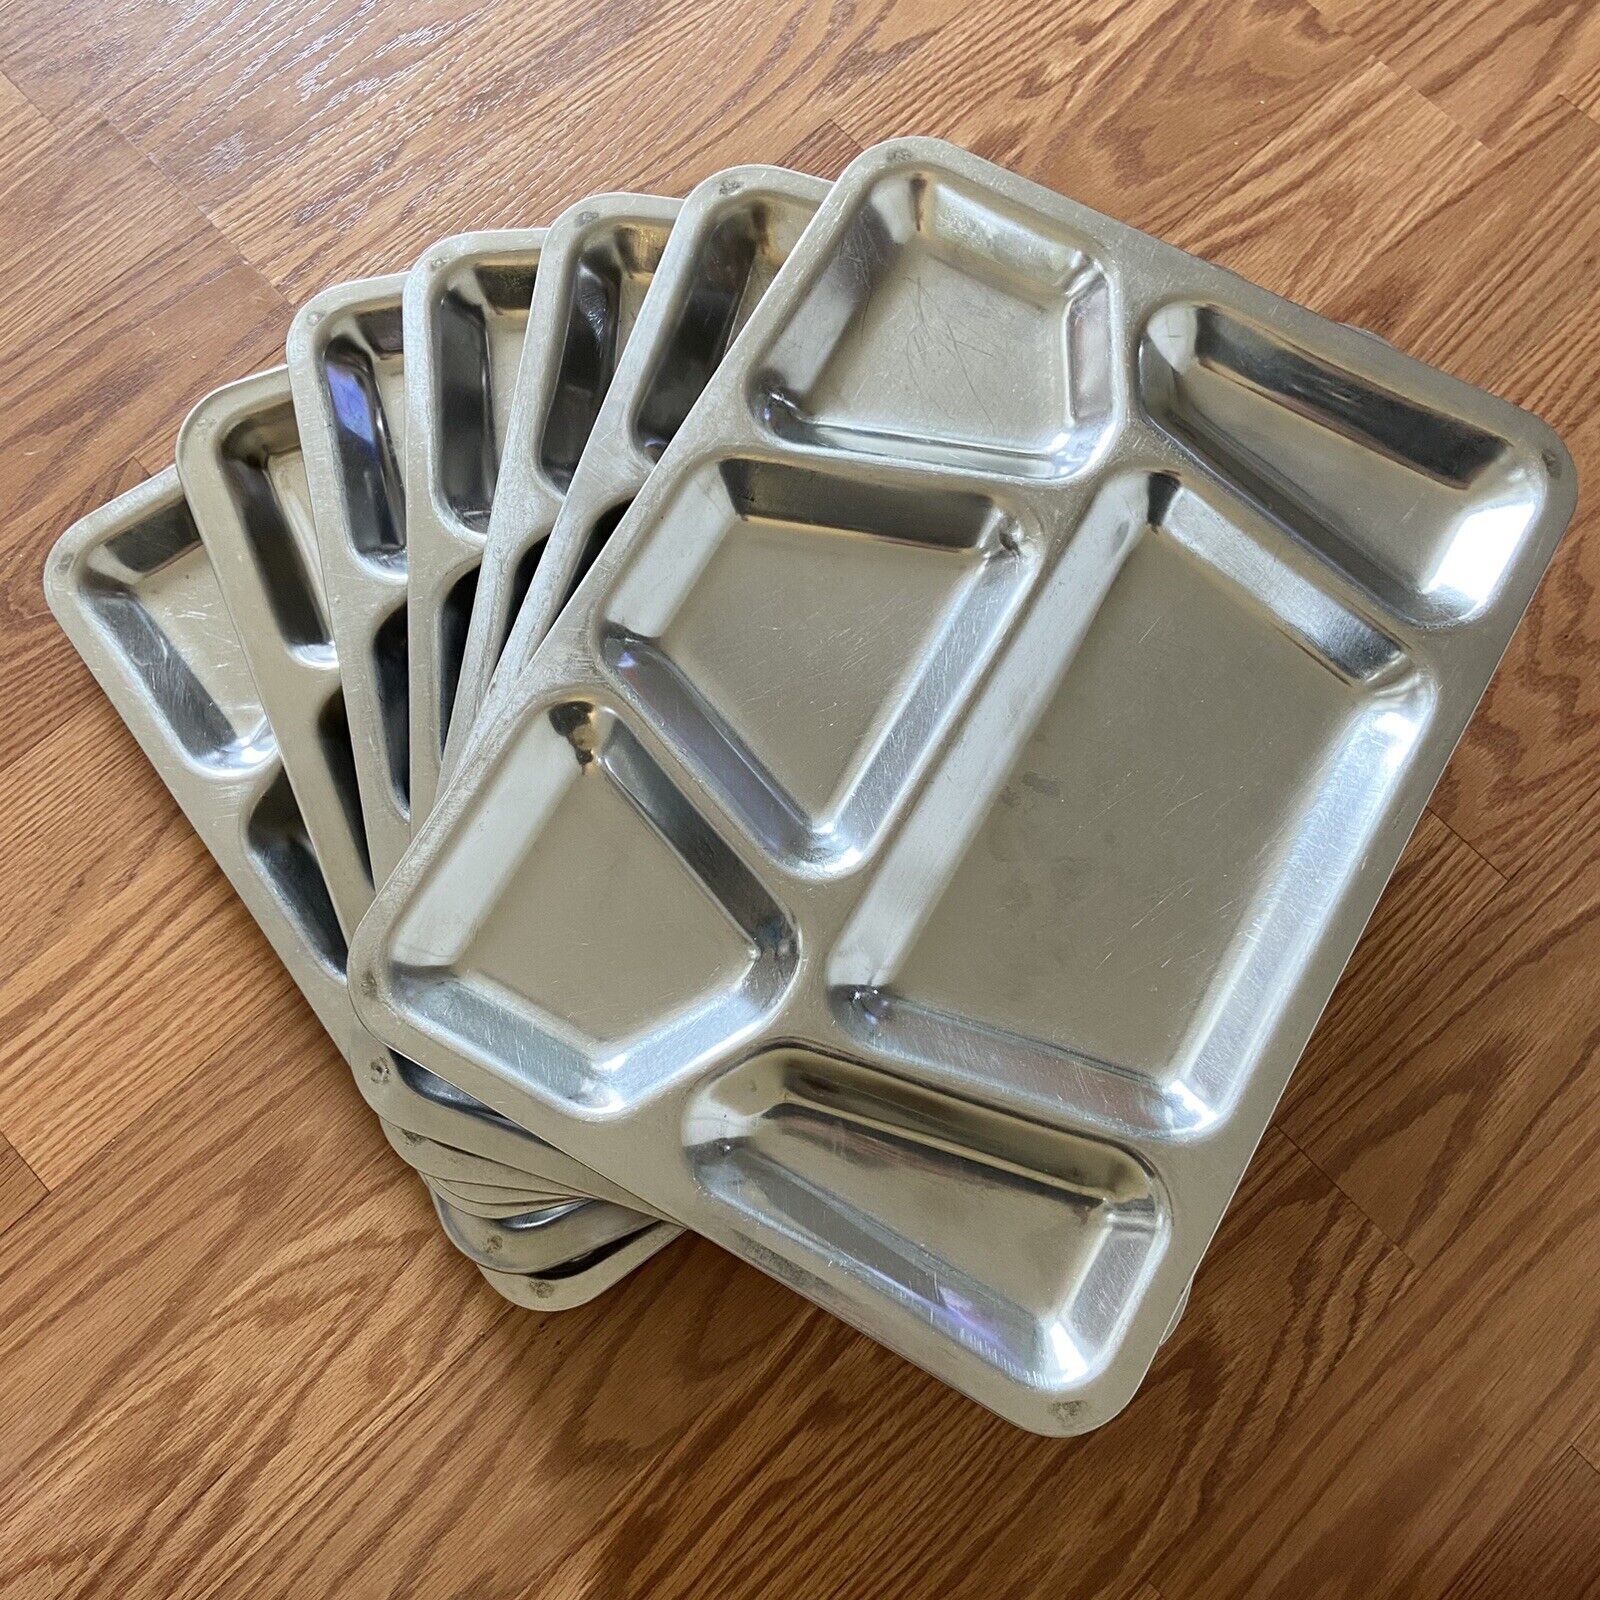 Vintage Carrollton MFG Co Mess Hall Trays 7 Piece Lot Metal Compartment Camping